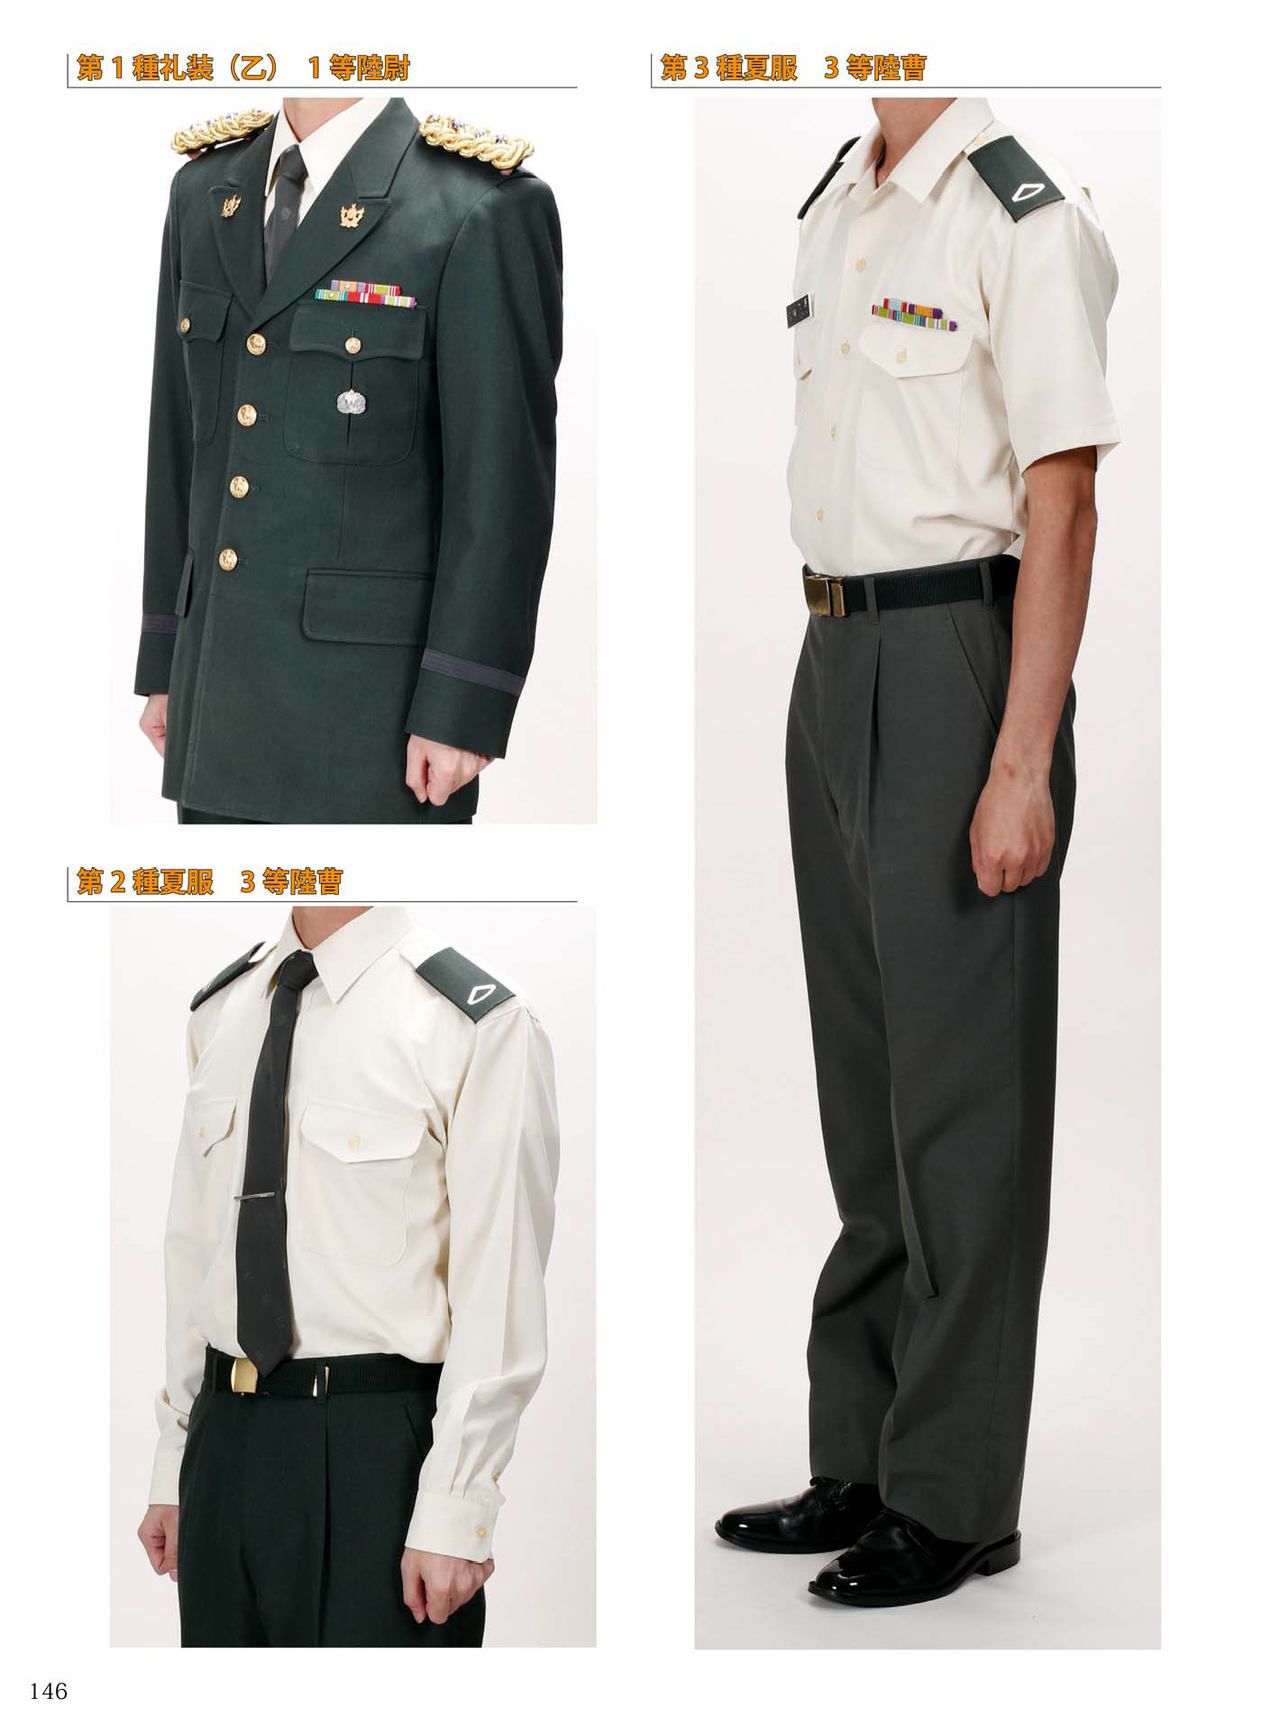 How to draw military uniforms and uniforms From Self-Defense Forces 軍服・制服の描き方 アメリカ軍・自衛隊の制服から戦闘服まで 149